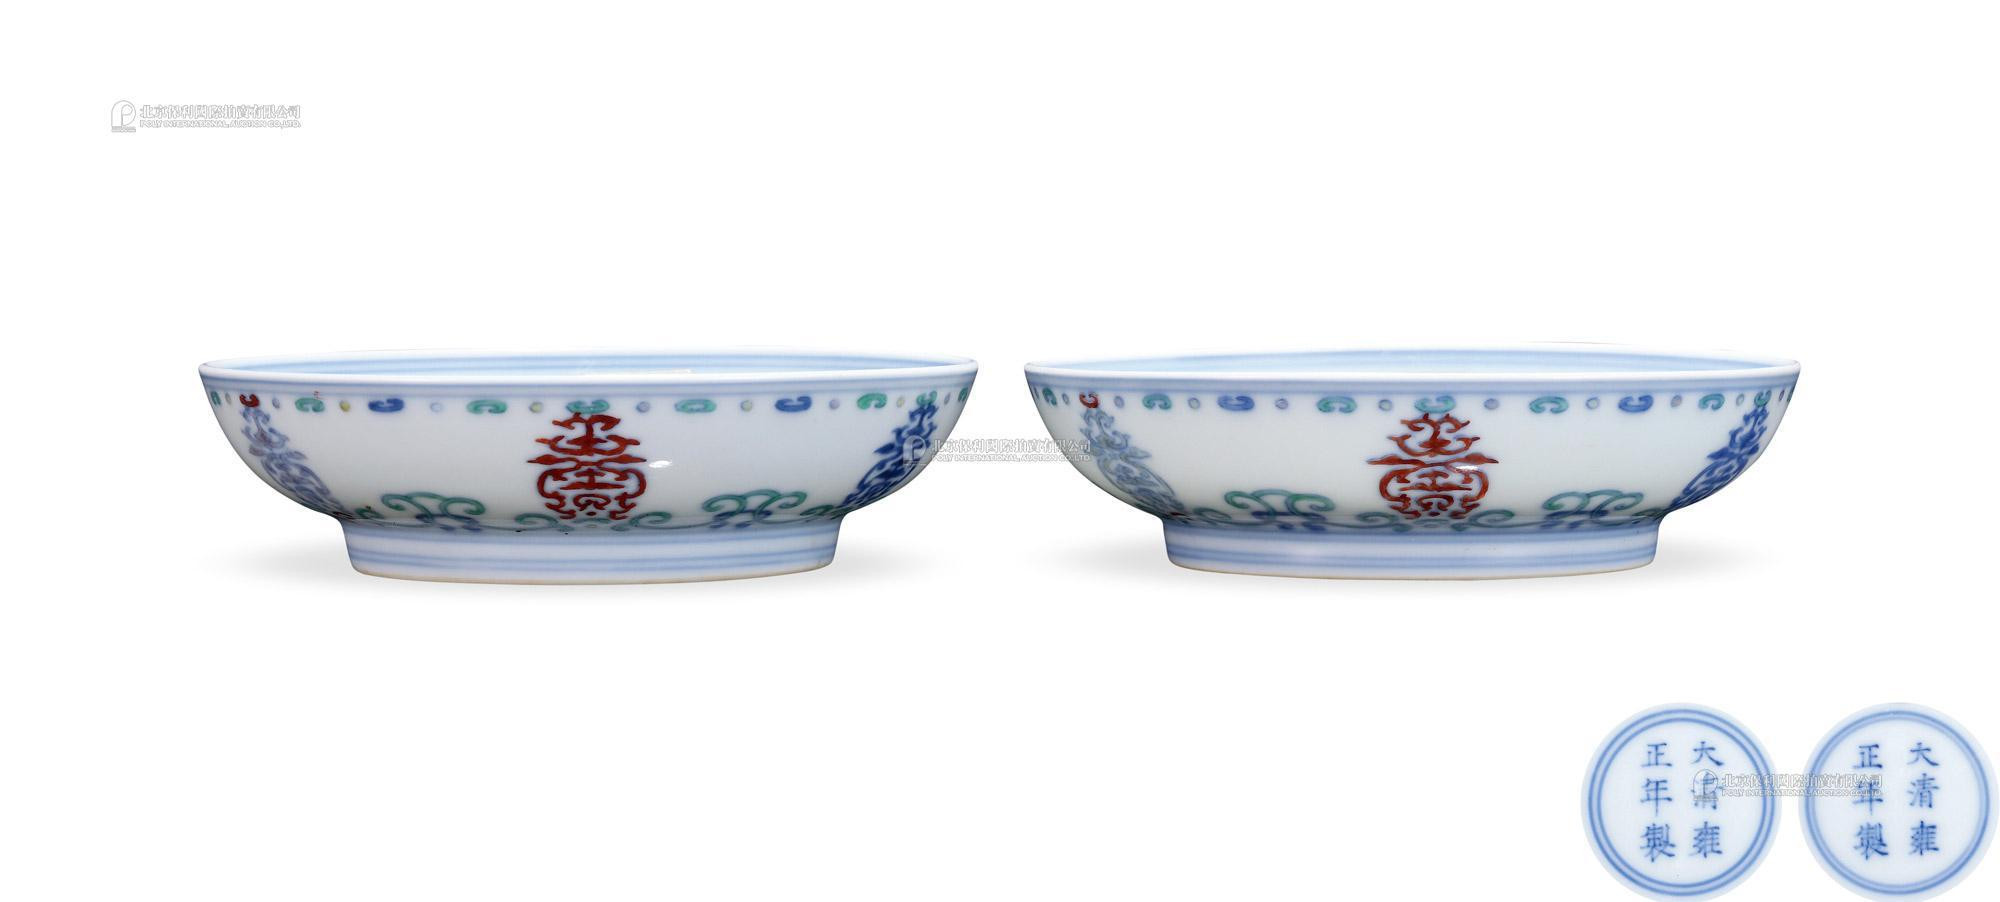 A PAIR OF CONTENDING COLORS PLATE